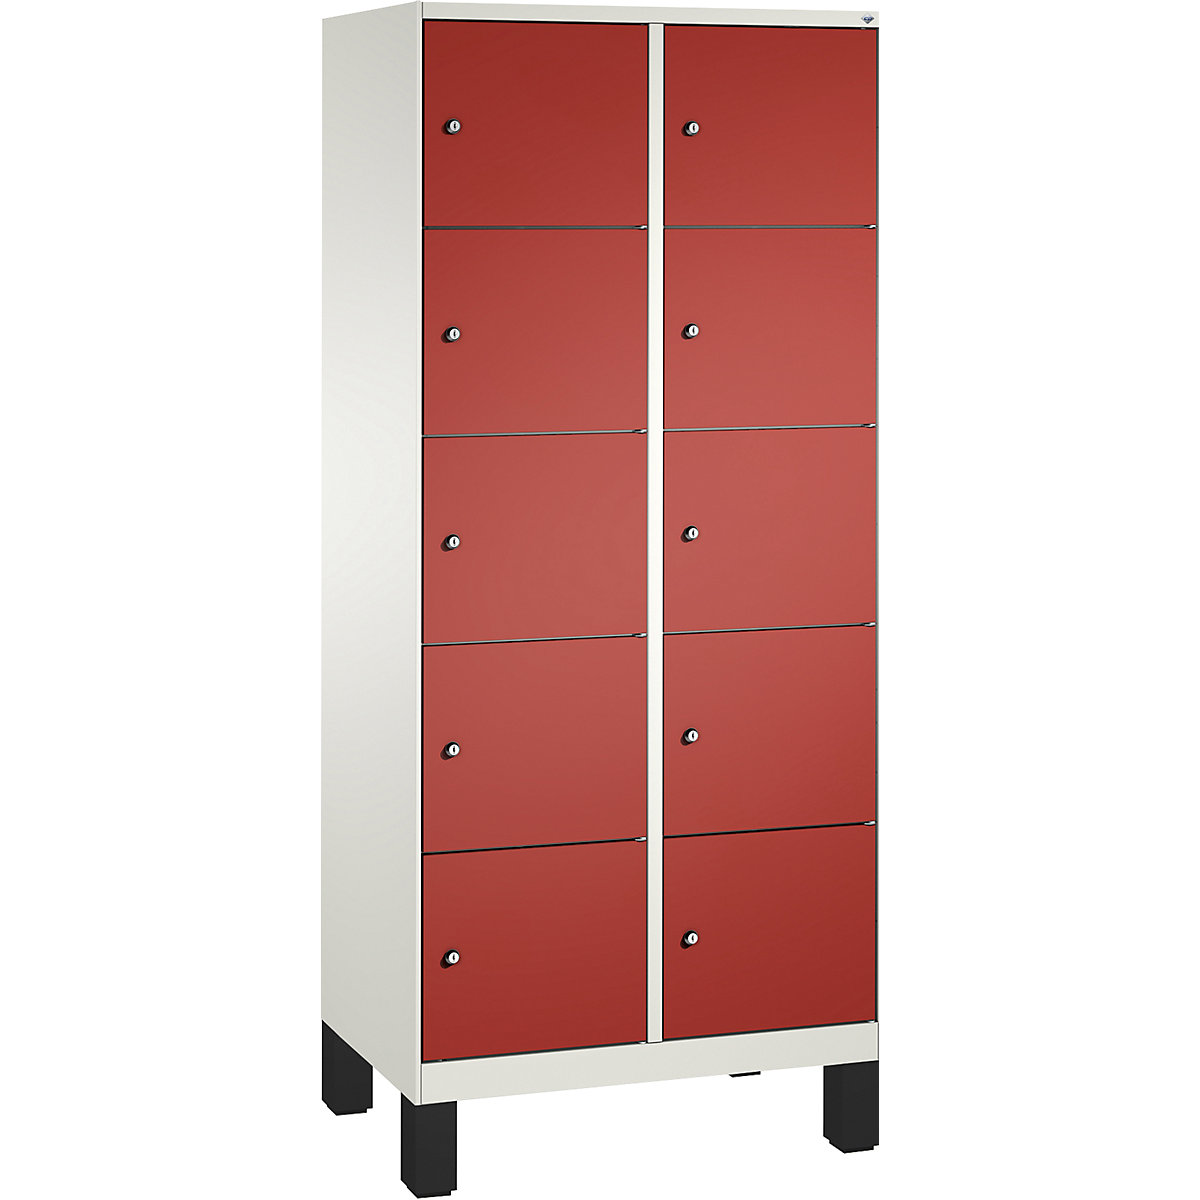 EVOLO locker unit, with feet – C+P, 2 compartments, 5 shelf compartments each, compartment width 400 mm, traffic white / flame red-15